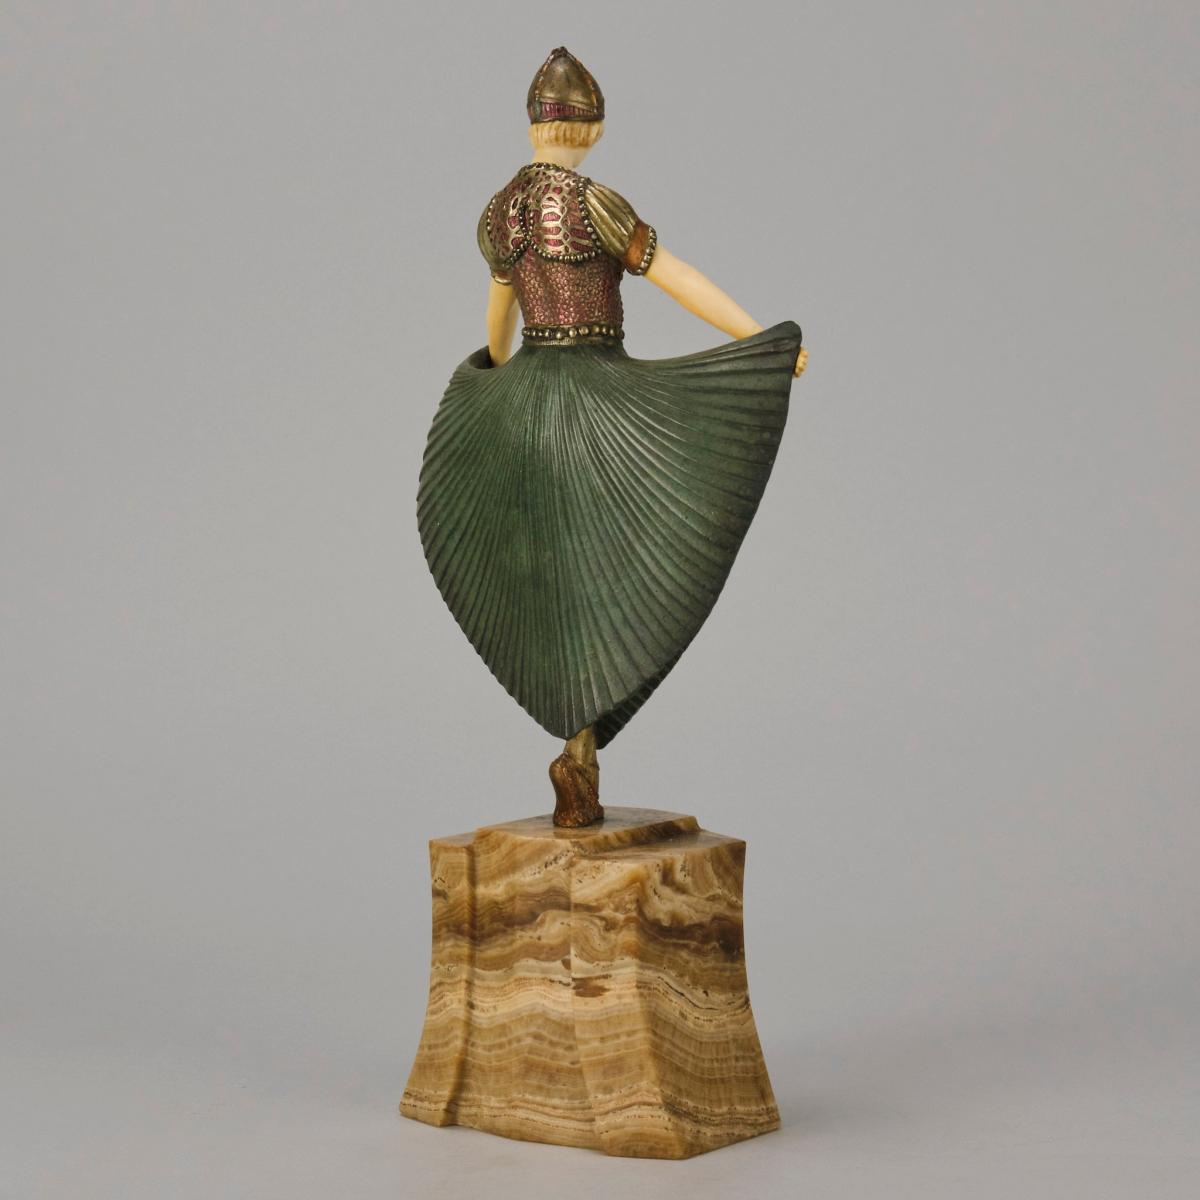 ‘The Actress’ Art Deco Bronze and Ivory by Demeter Chiparus - circa 1920